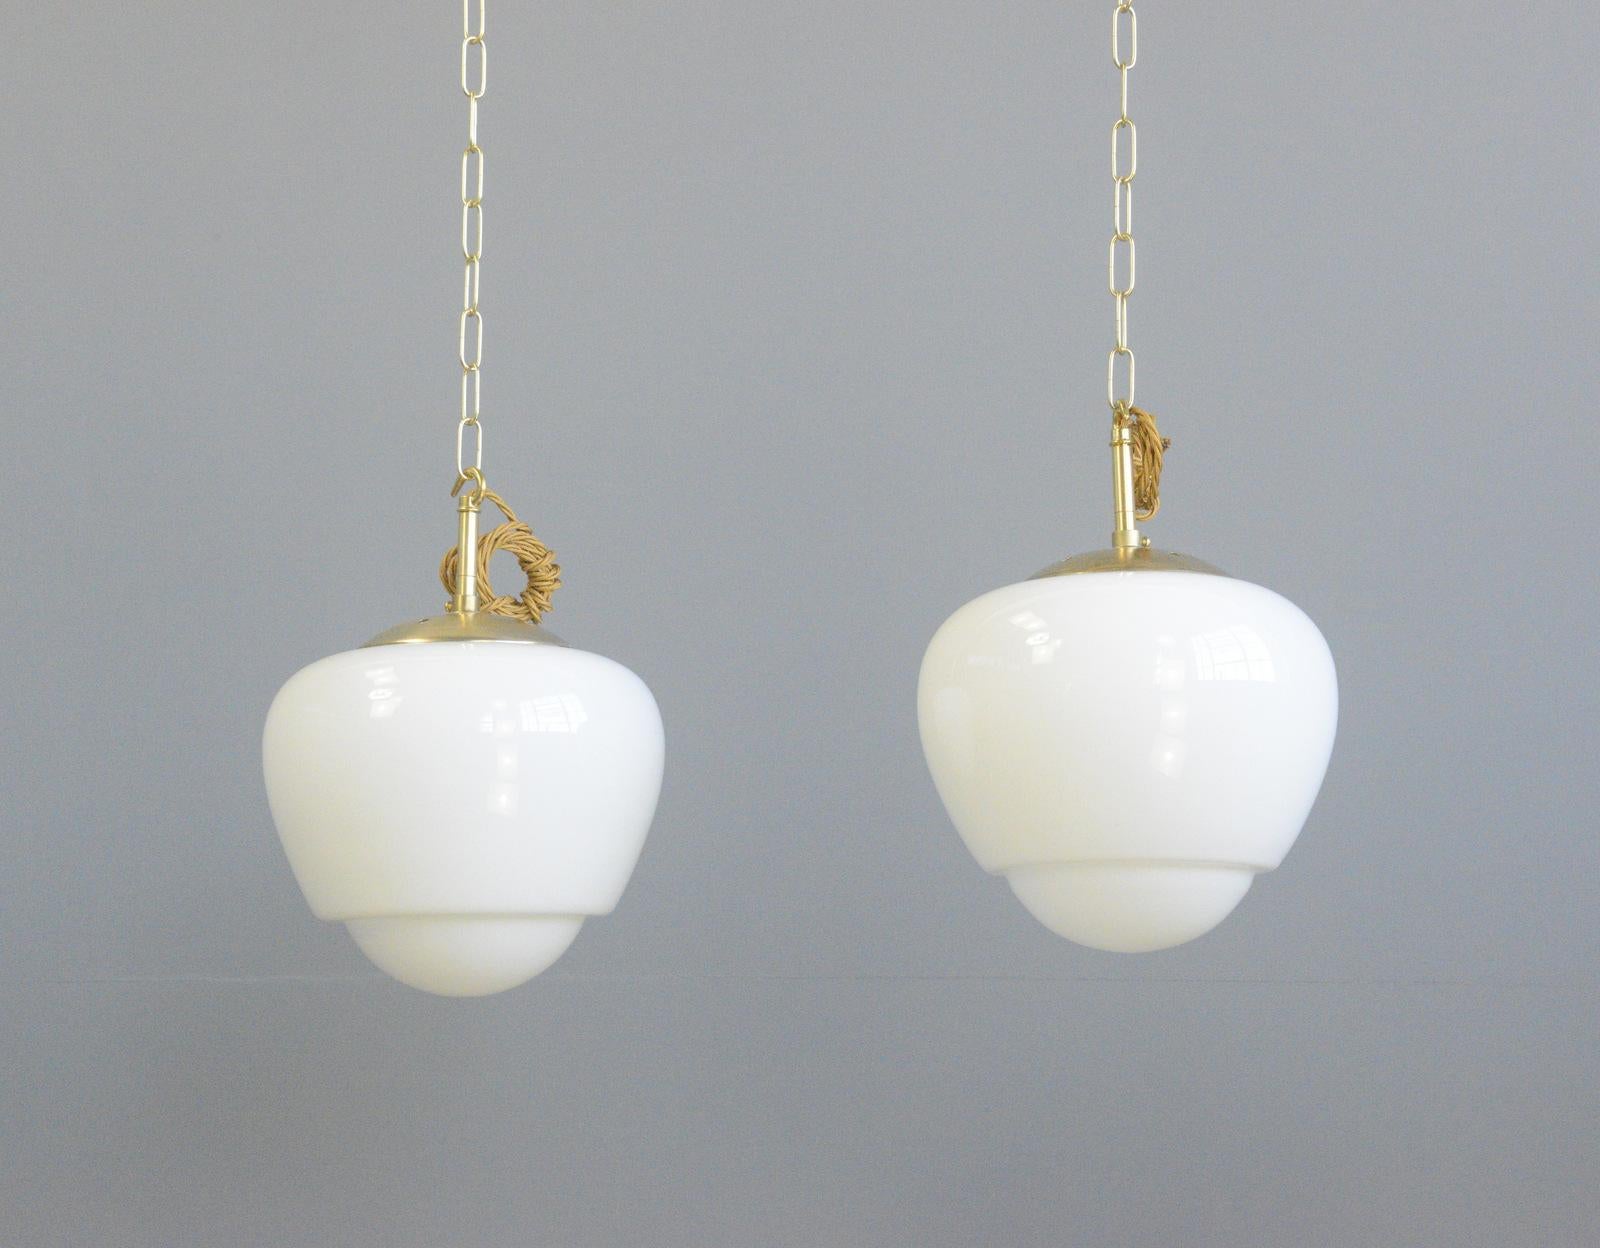 Czech Teardrop Opaline pendant lights circa 1940s

- Brass tops
- Elegant shaped opaque glass 
- Comes with 100cm of gold twist cable, brass chain and ceiling rose
- Takes E27 fitting bulbs
- Czech ~ Circa 1940s
- 25cm wide x 30cm